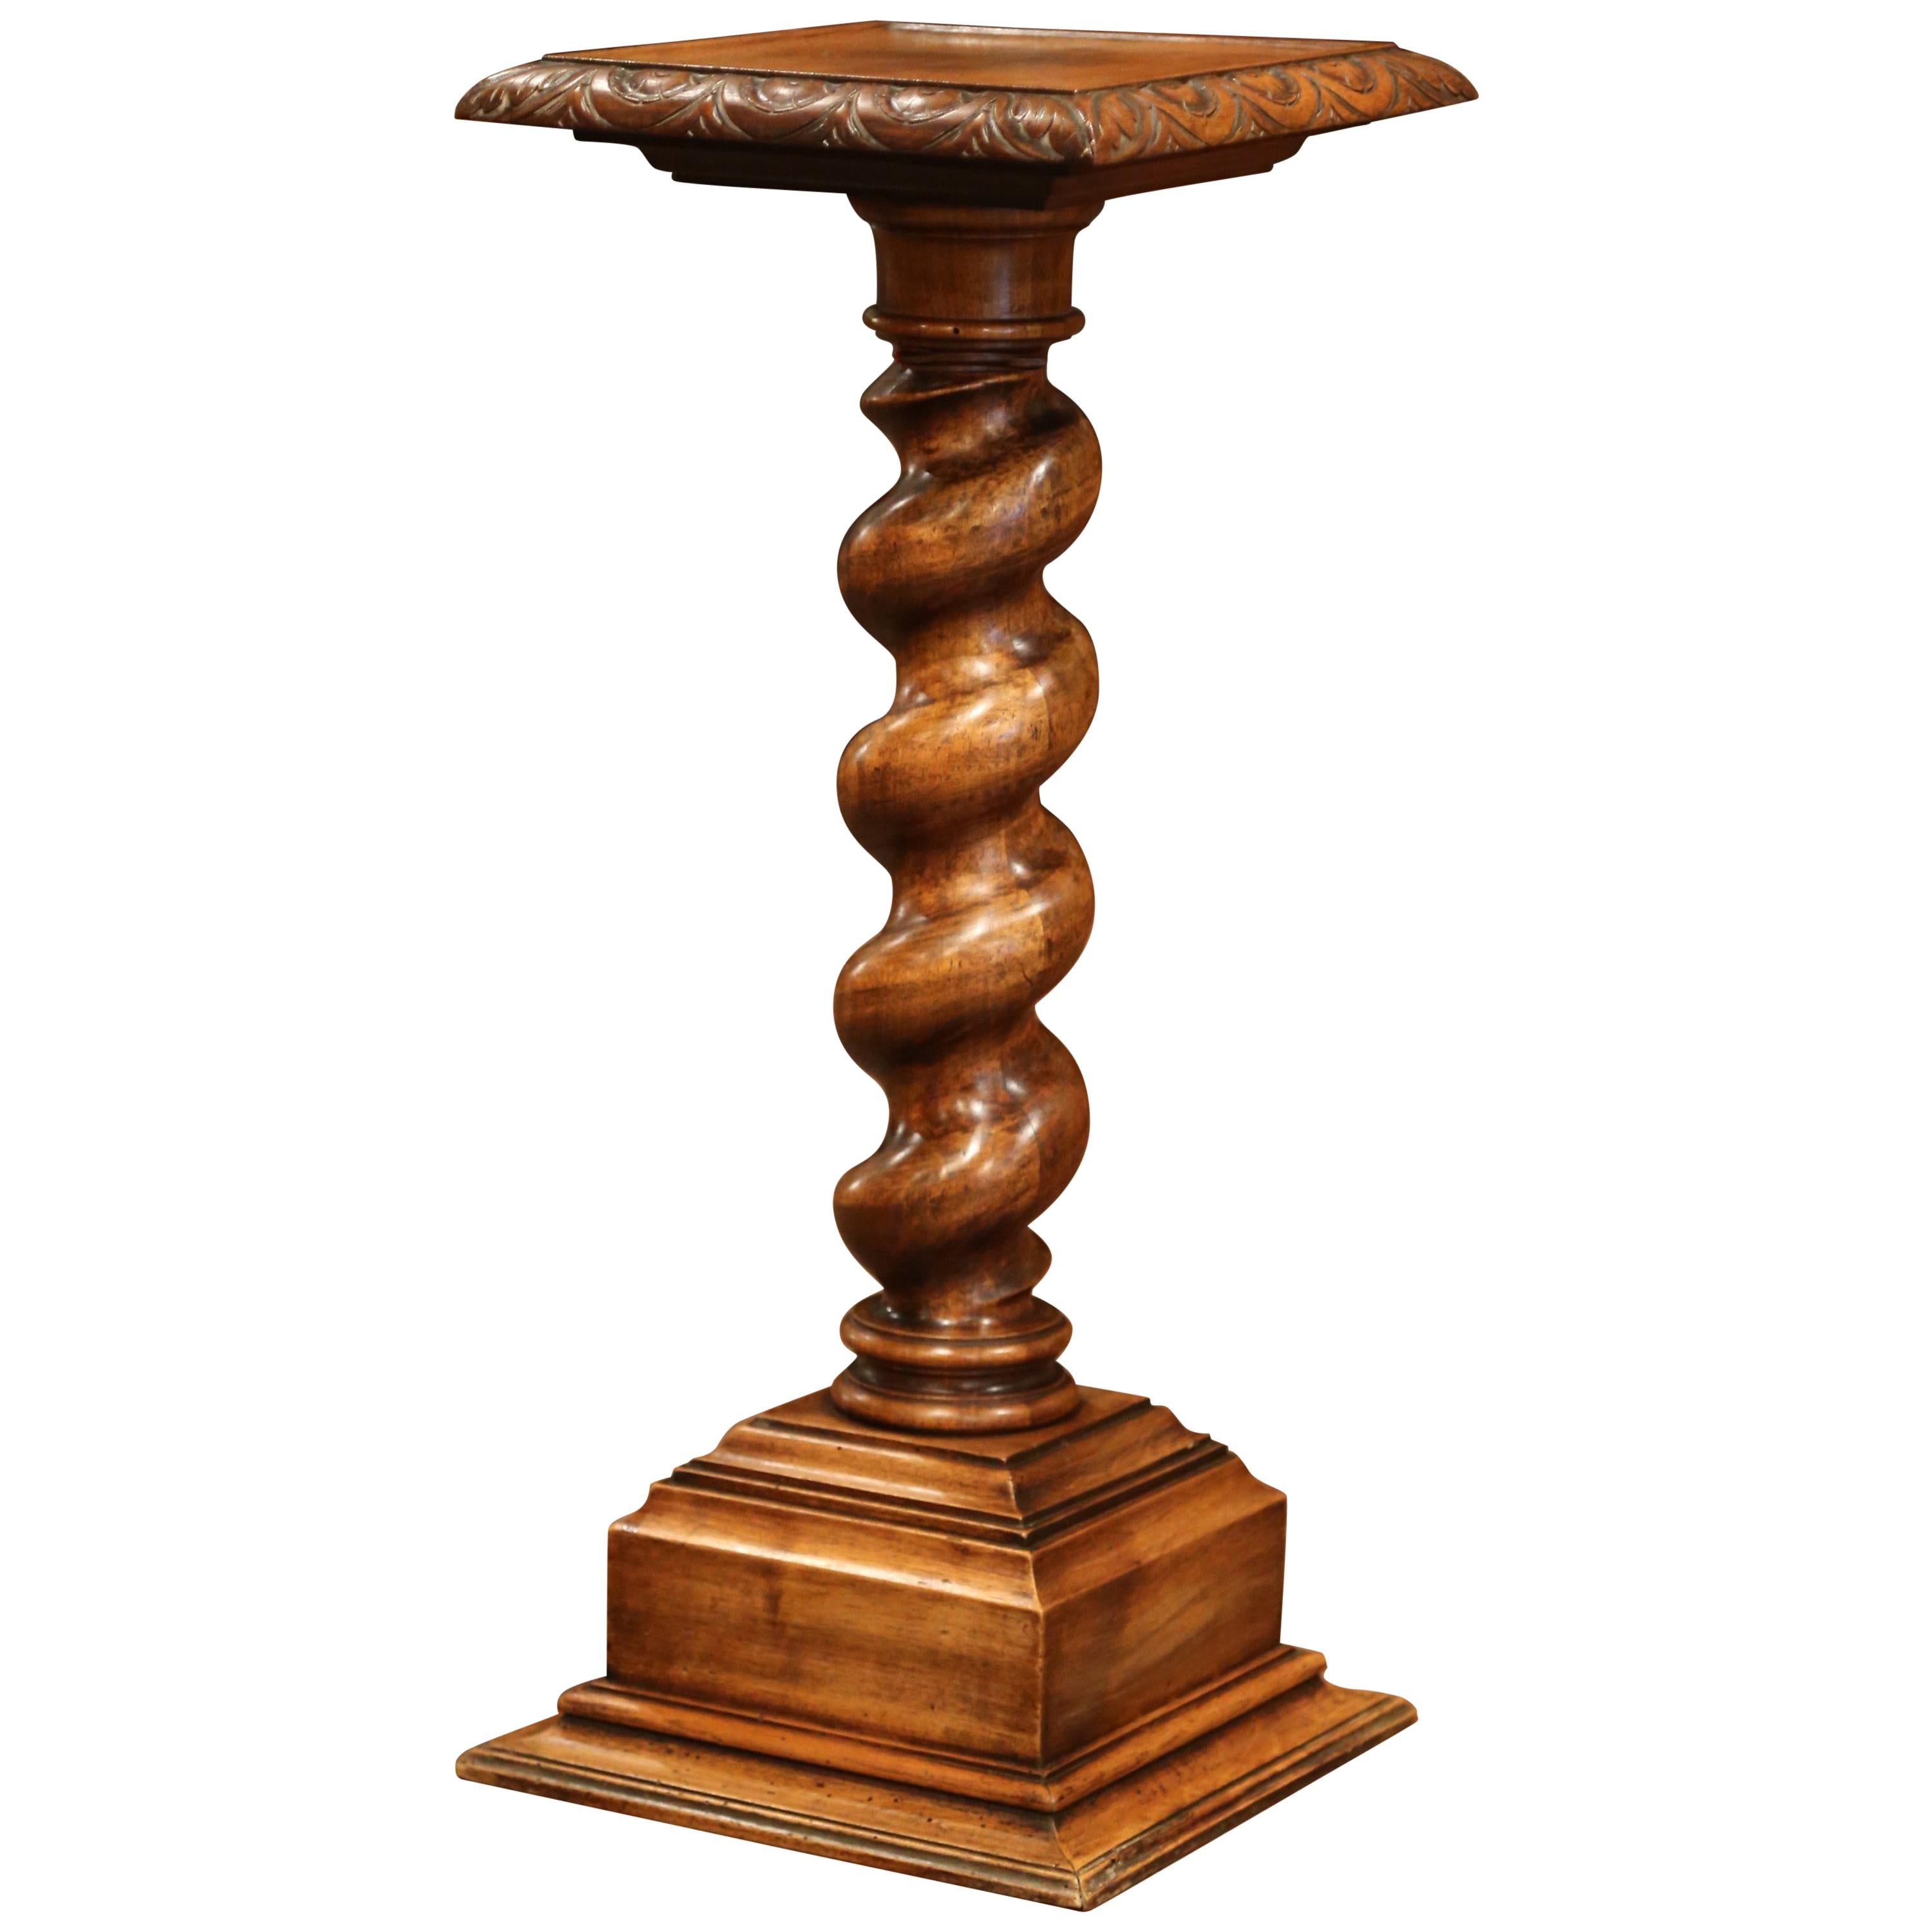 19th Century French Carved Walnut Barley Twist Pedestal Table with Square Top